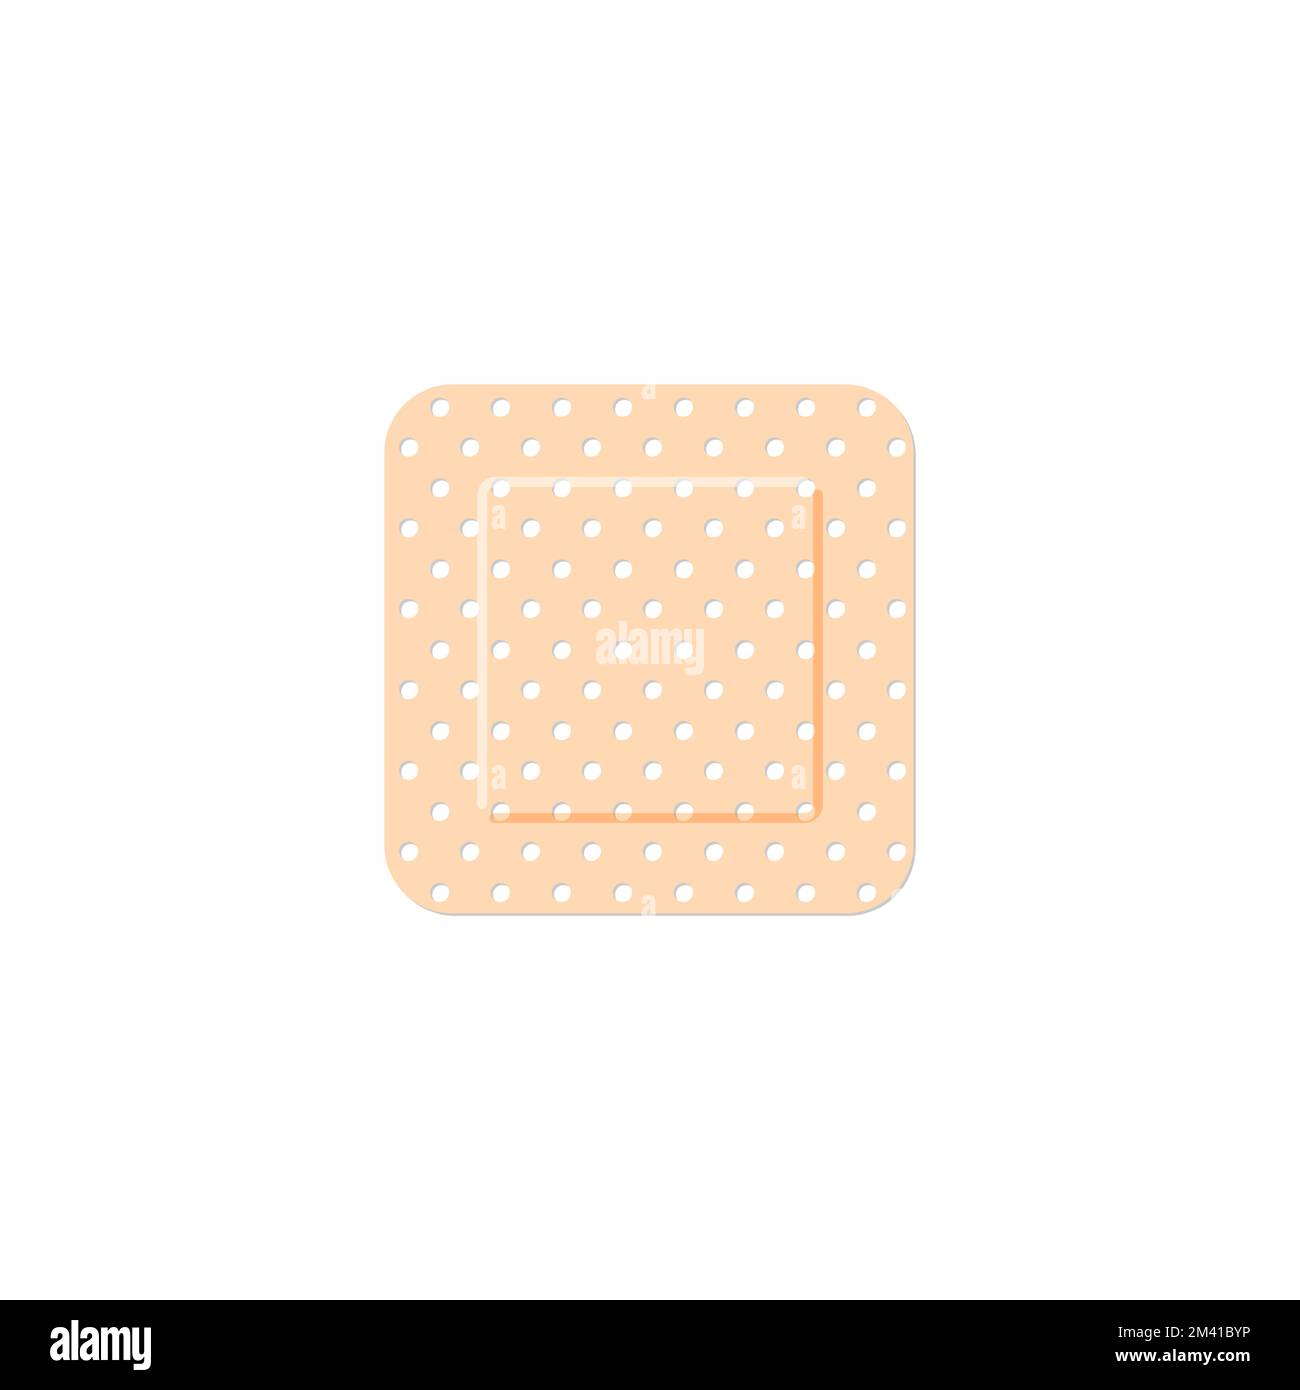 Medical plaster. First aid band plaster strip medical patch. Wound cross plastering band and porous bandage plasterers Stock Vector